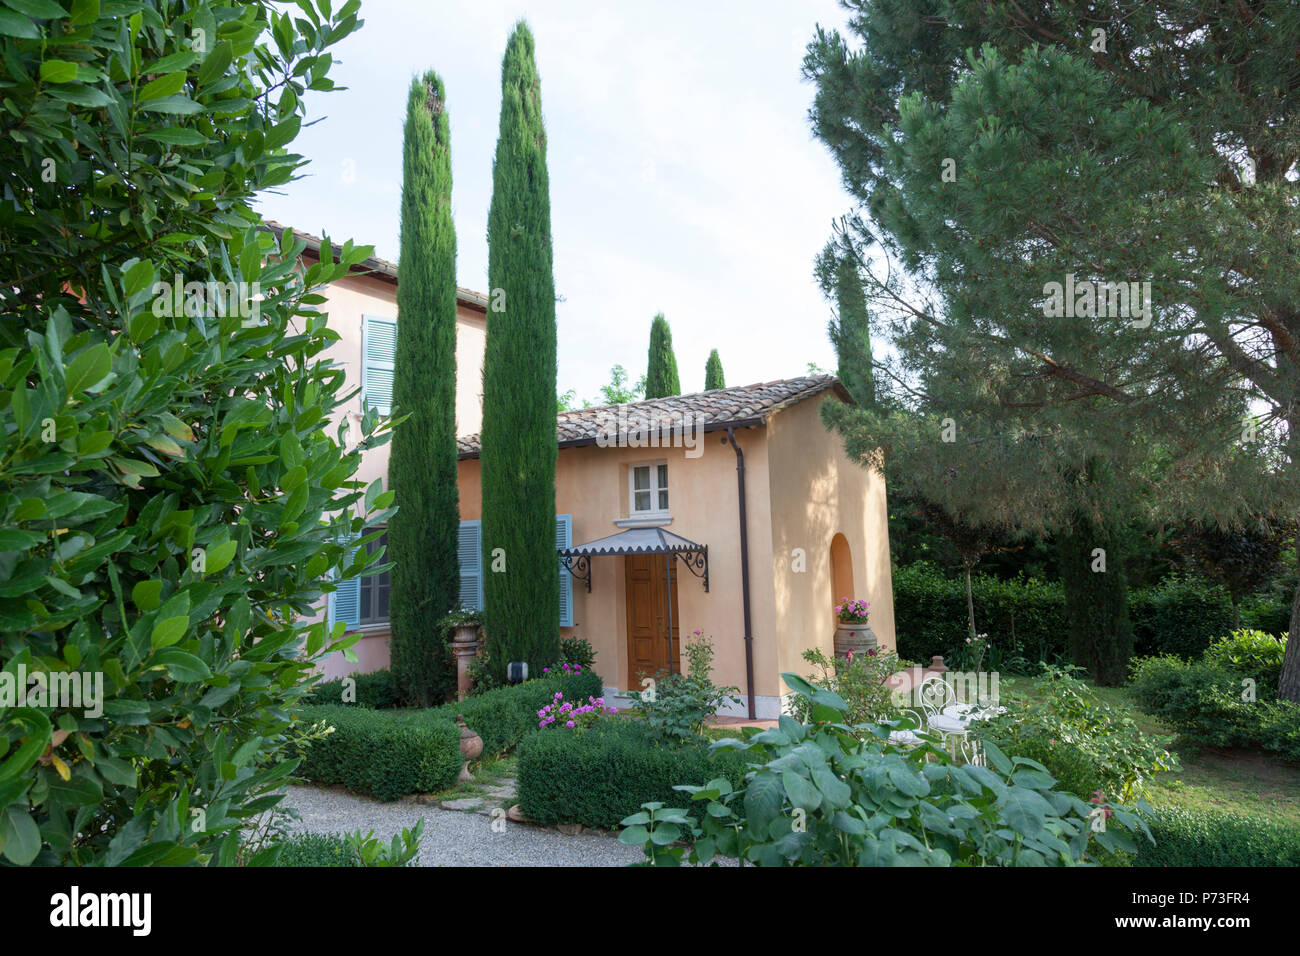 A pair of cypresses (Cupressus sempervirens) in a Tuscan property (Montepulciano - Tuscany). The cypress is a characteristic tree of Tuscany. Stock Photo